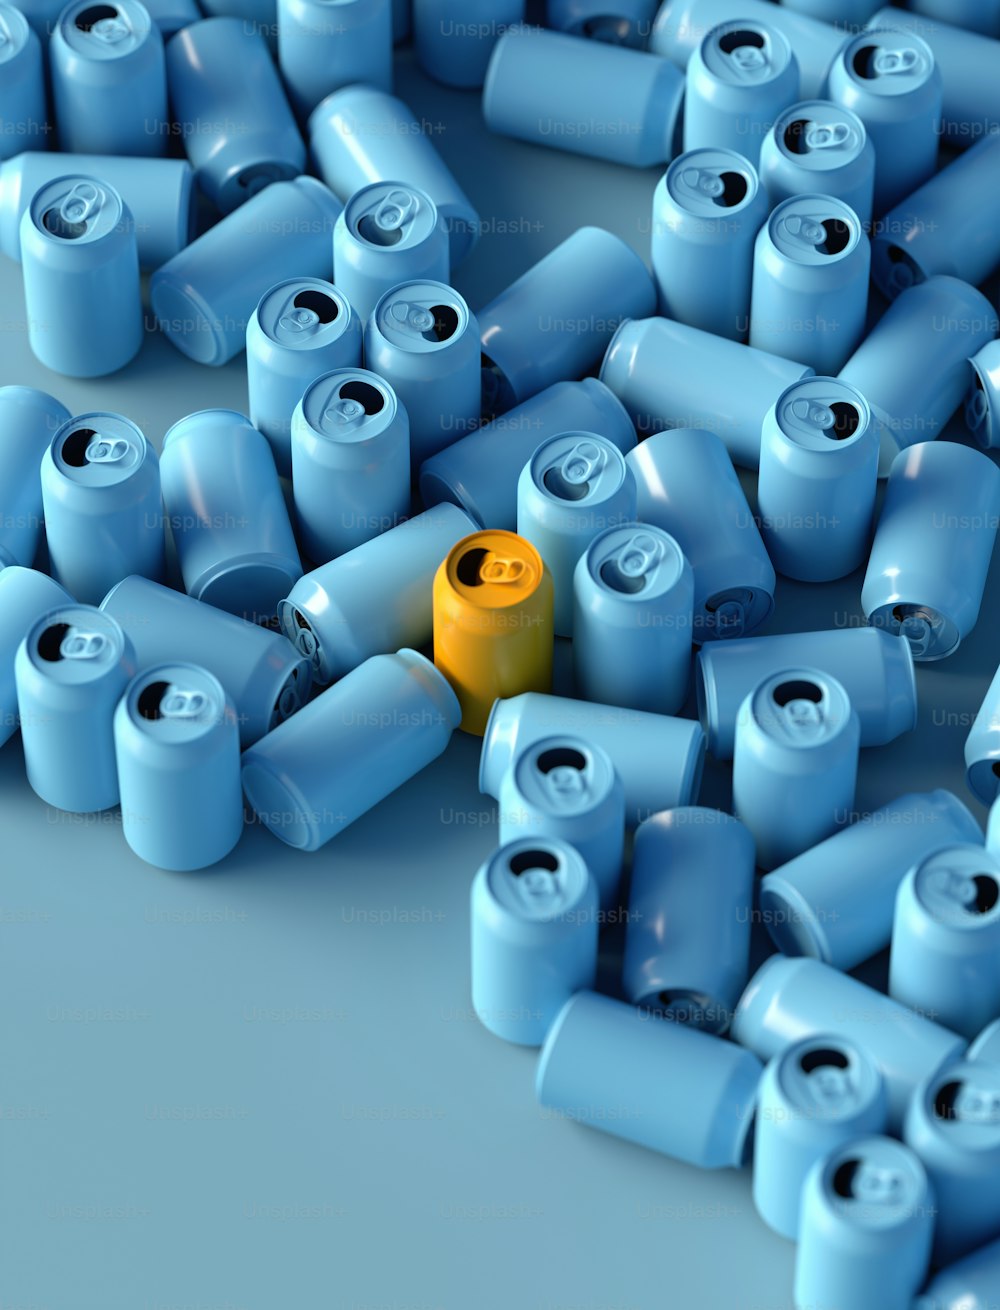 a yellow object is surrounded by many blue objects